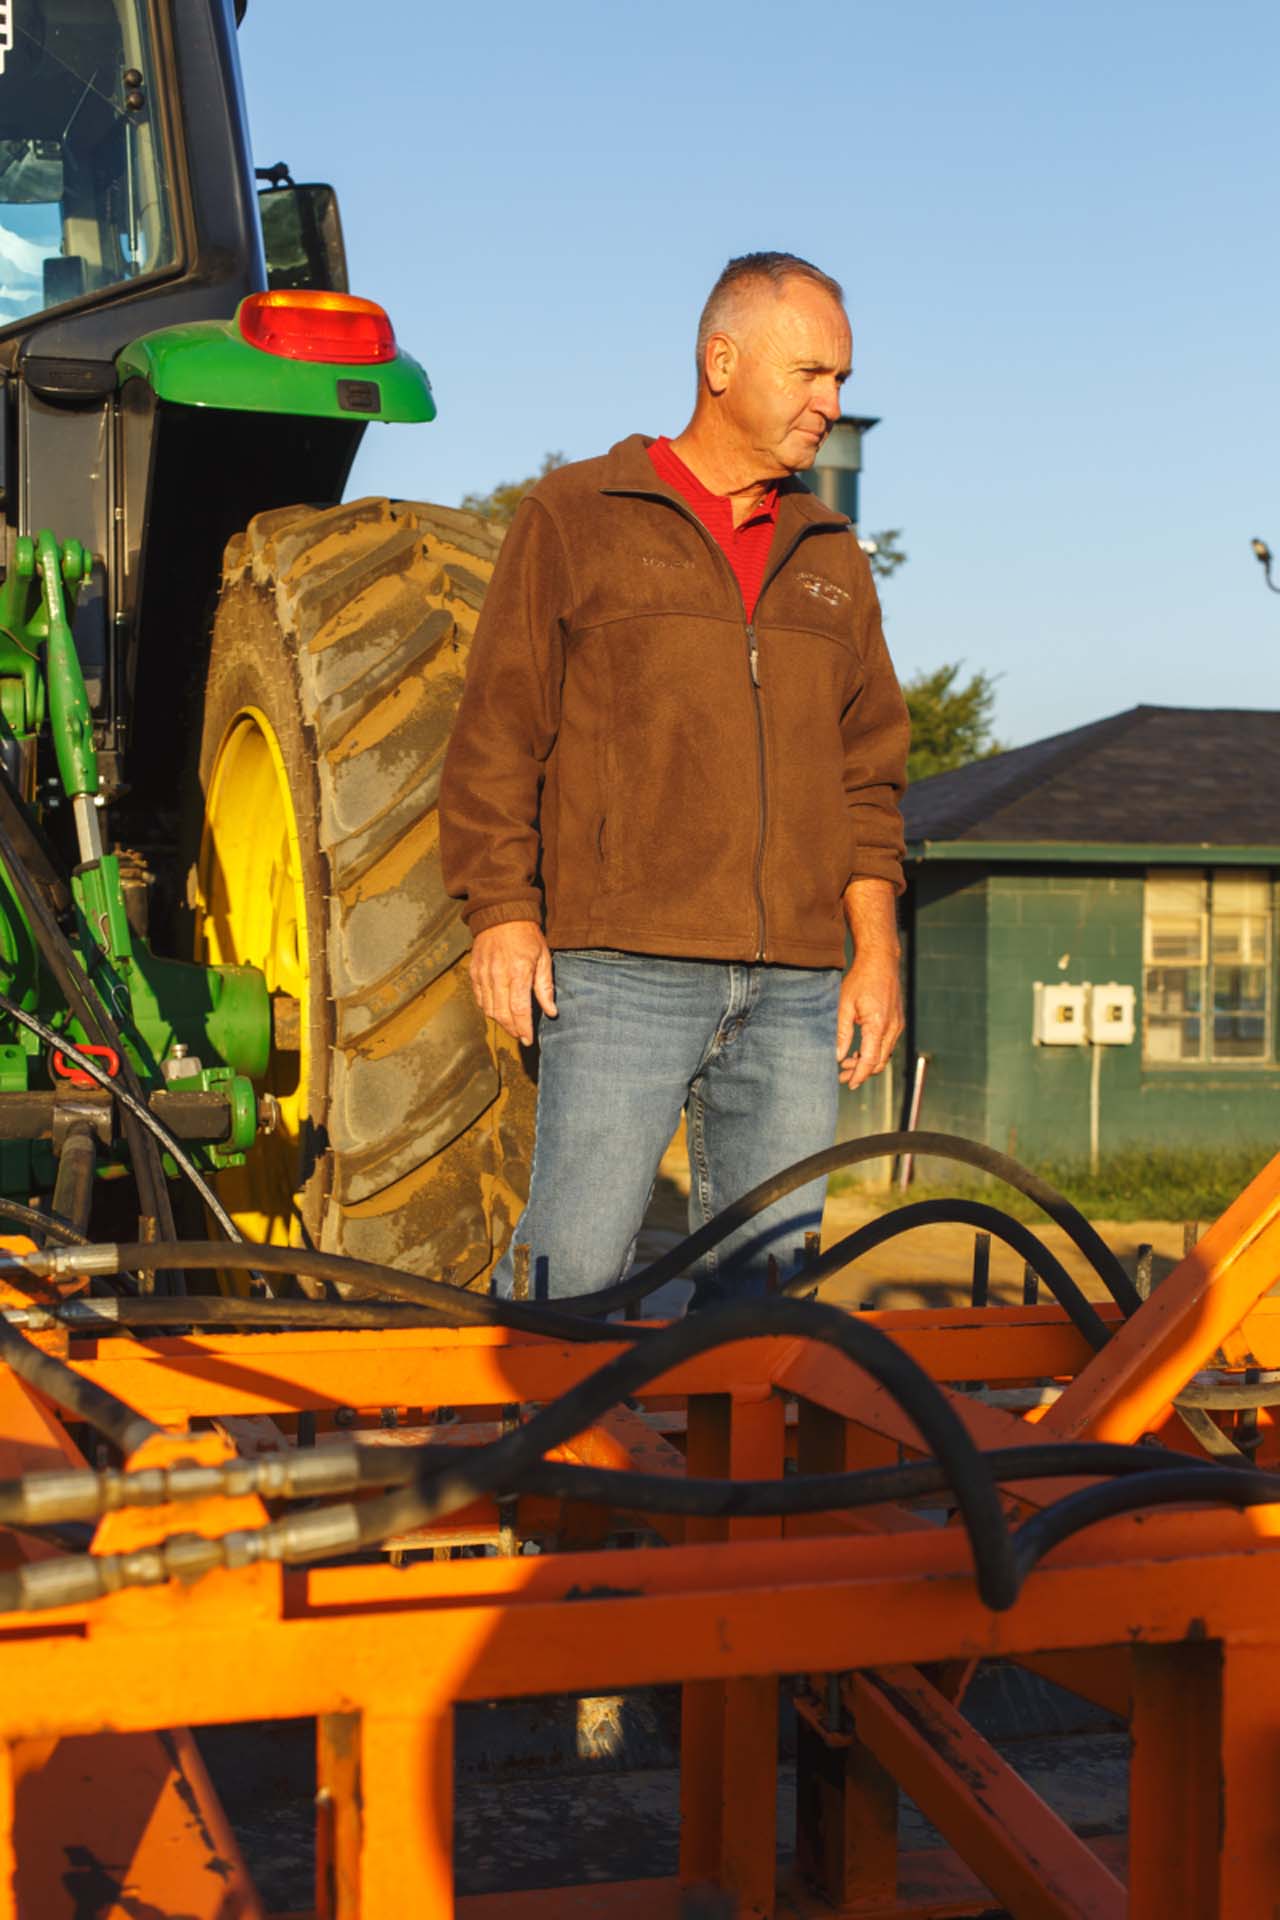 A candid photo of Jim Pendergest standing in front of a large piece of equipment. He is an older White man with short gray hair. He is wearing a brown jacket over a red polo and a pair of blue jeans.